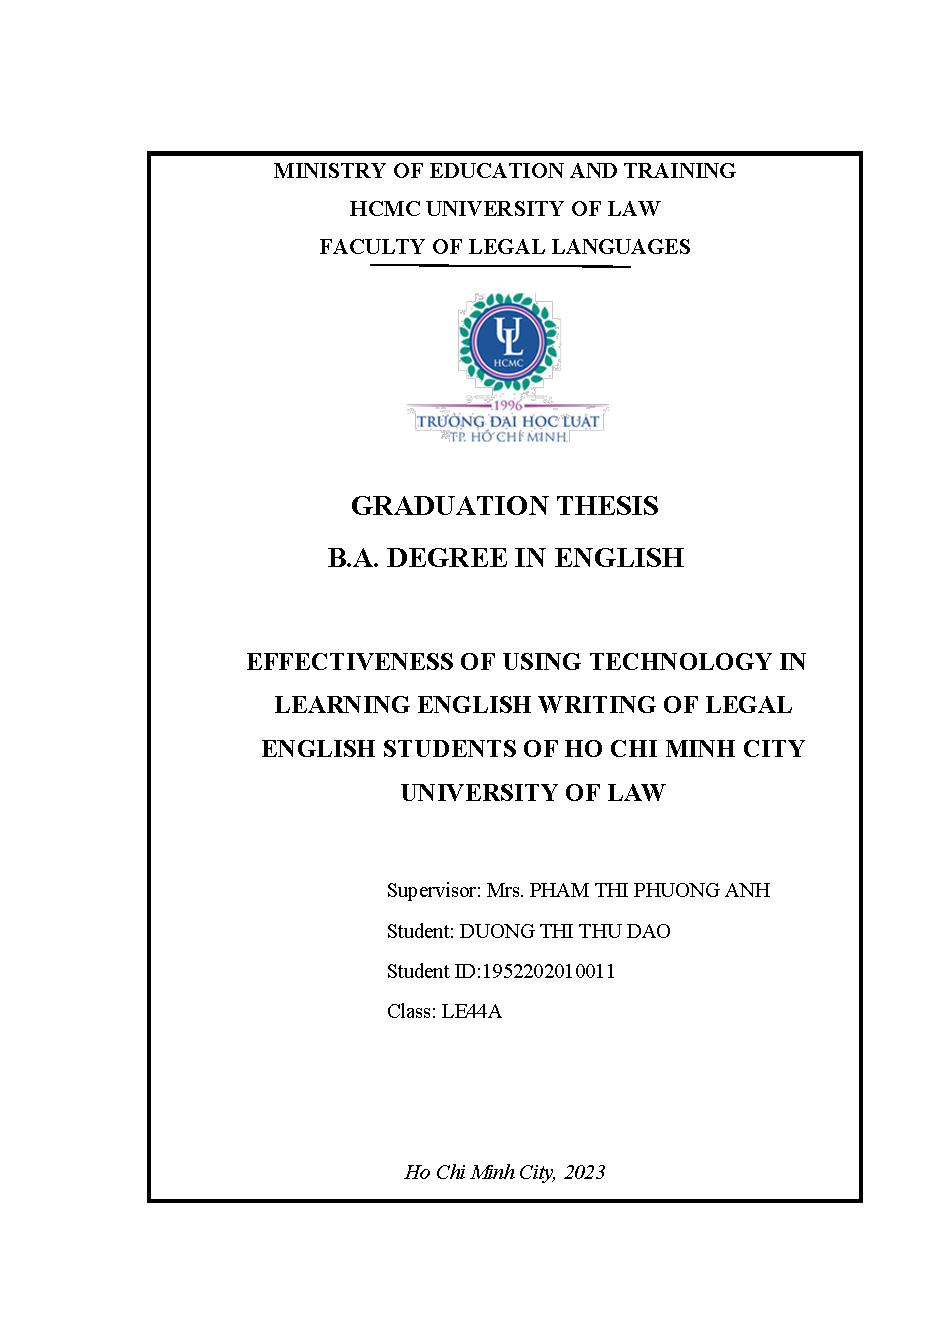 The Effectiveness of using technology in learning English writing of students in the legal Faculty at Ho Chi Minh University of Law